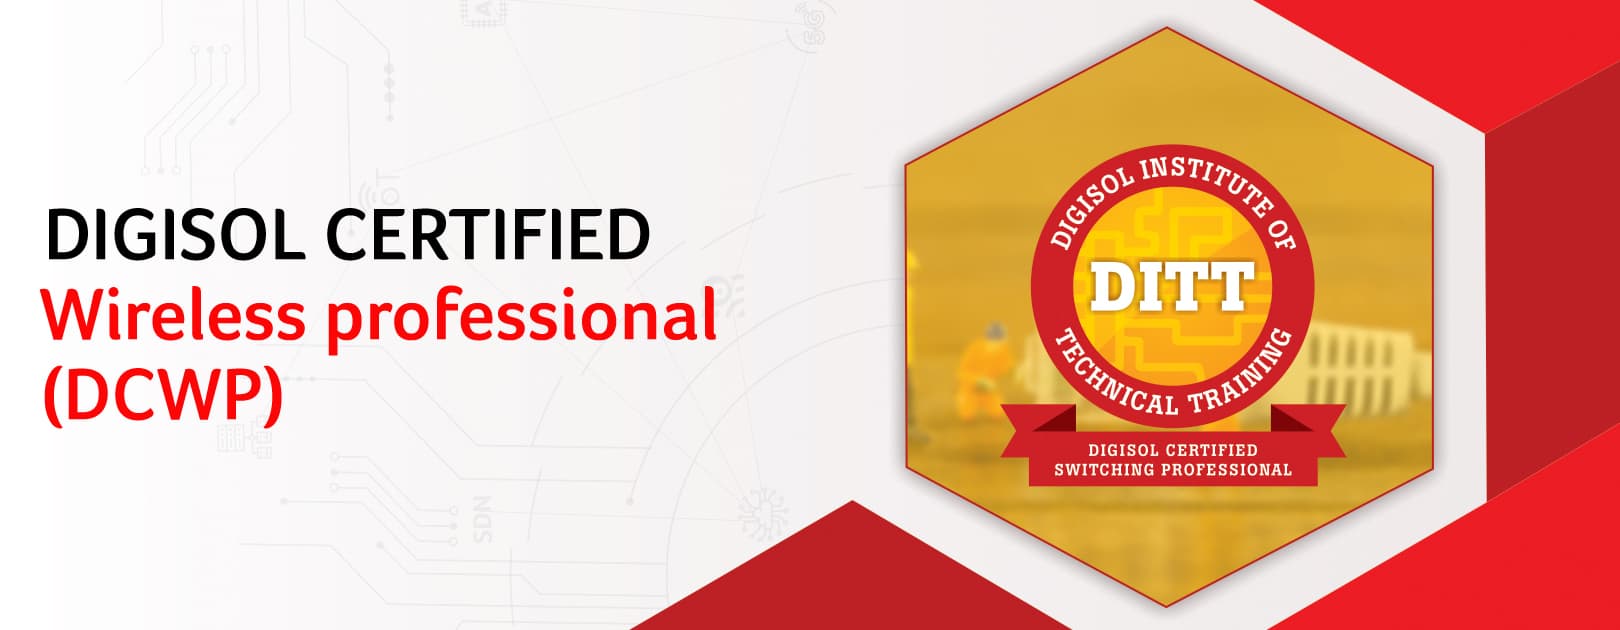 Digisol Certified Wireless professional (DCWP) under DIGISOL Institute of Technical training (DITT) is completely based on imparting comprehensive knowledge on Wireless Solutions. The program will include training on access points, controllers, and wireless standards. Also, It will involve new wireless architectures for controllers. It consists of design topics to include predictive analysis along with pre and post deployment site surveys. The Program benefits are as listed below :  1. Provide training on access points, controllers, and wireless standards. 2. Includes new wireless architectures for controllers. 3. Client mobility topics now include centralized and converged options. 4. Expanded design topics to include predictive analysis along with pre and post deployment site surveys. Certification Validity : One year